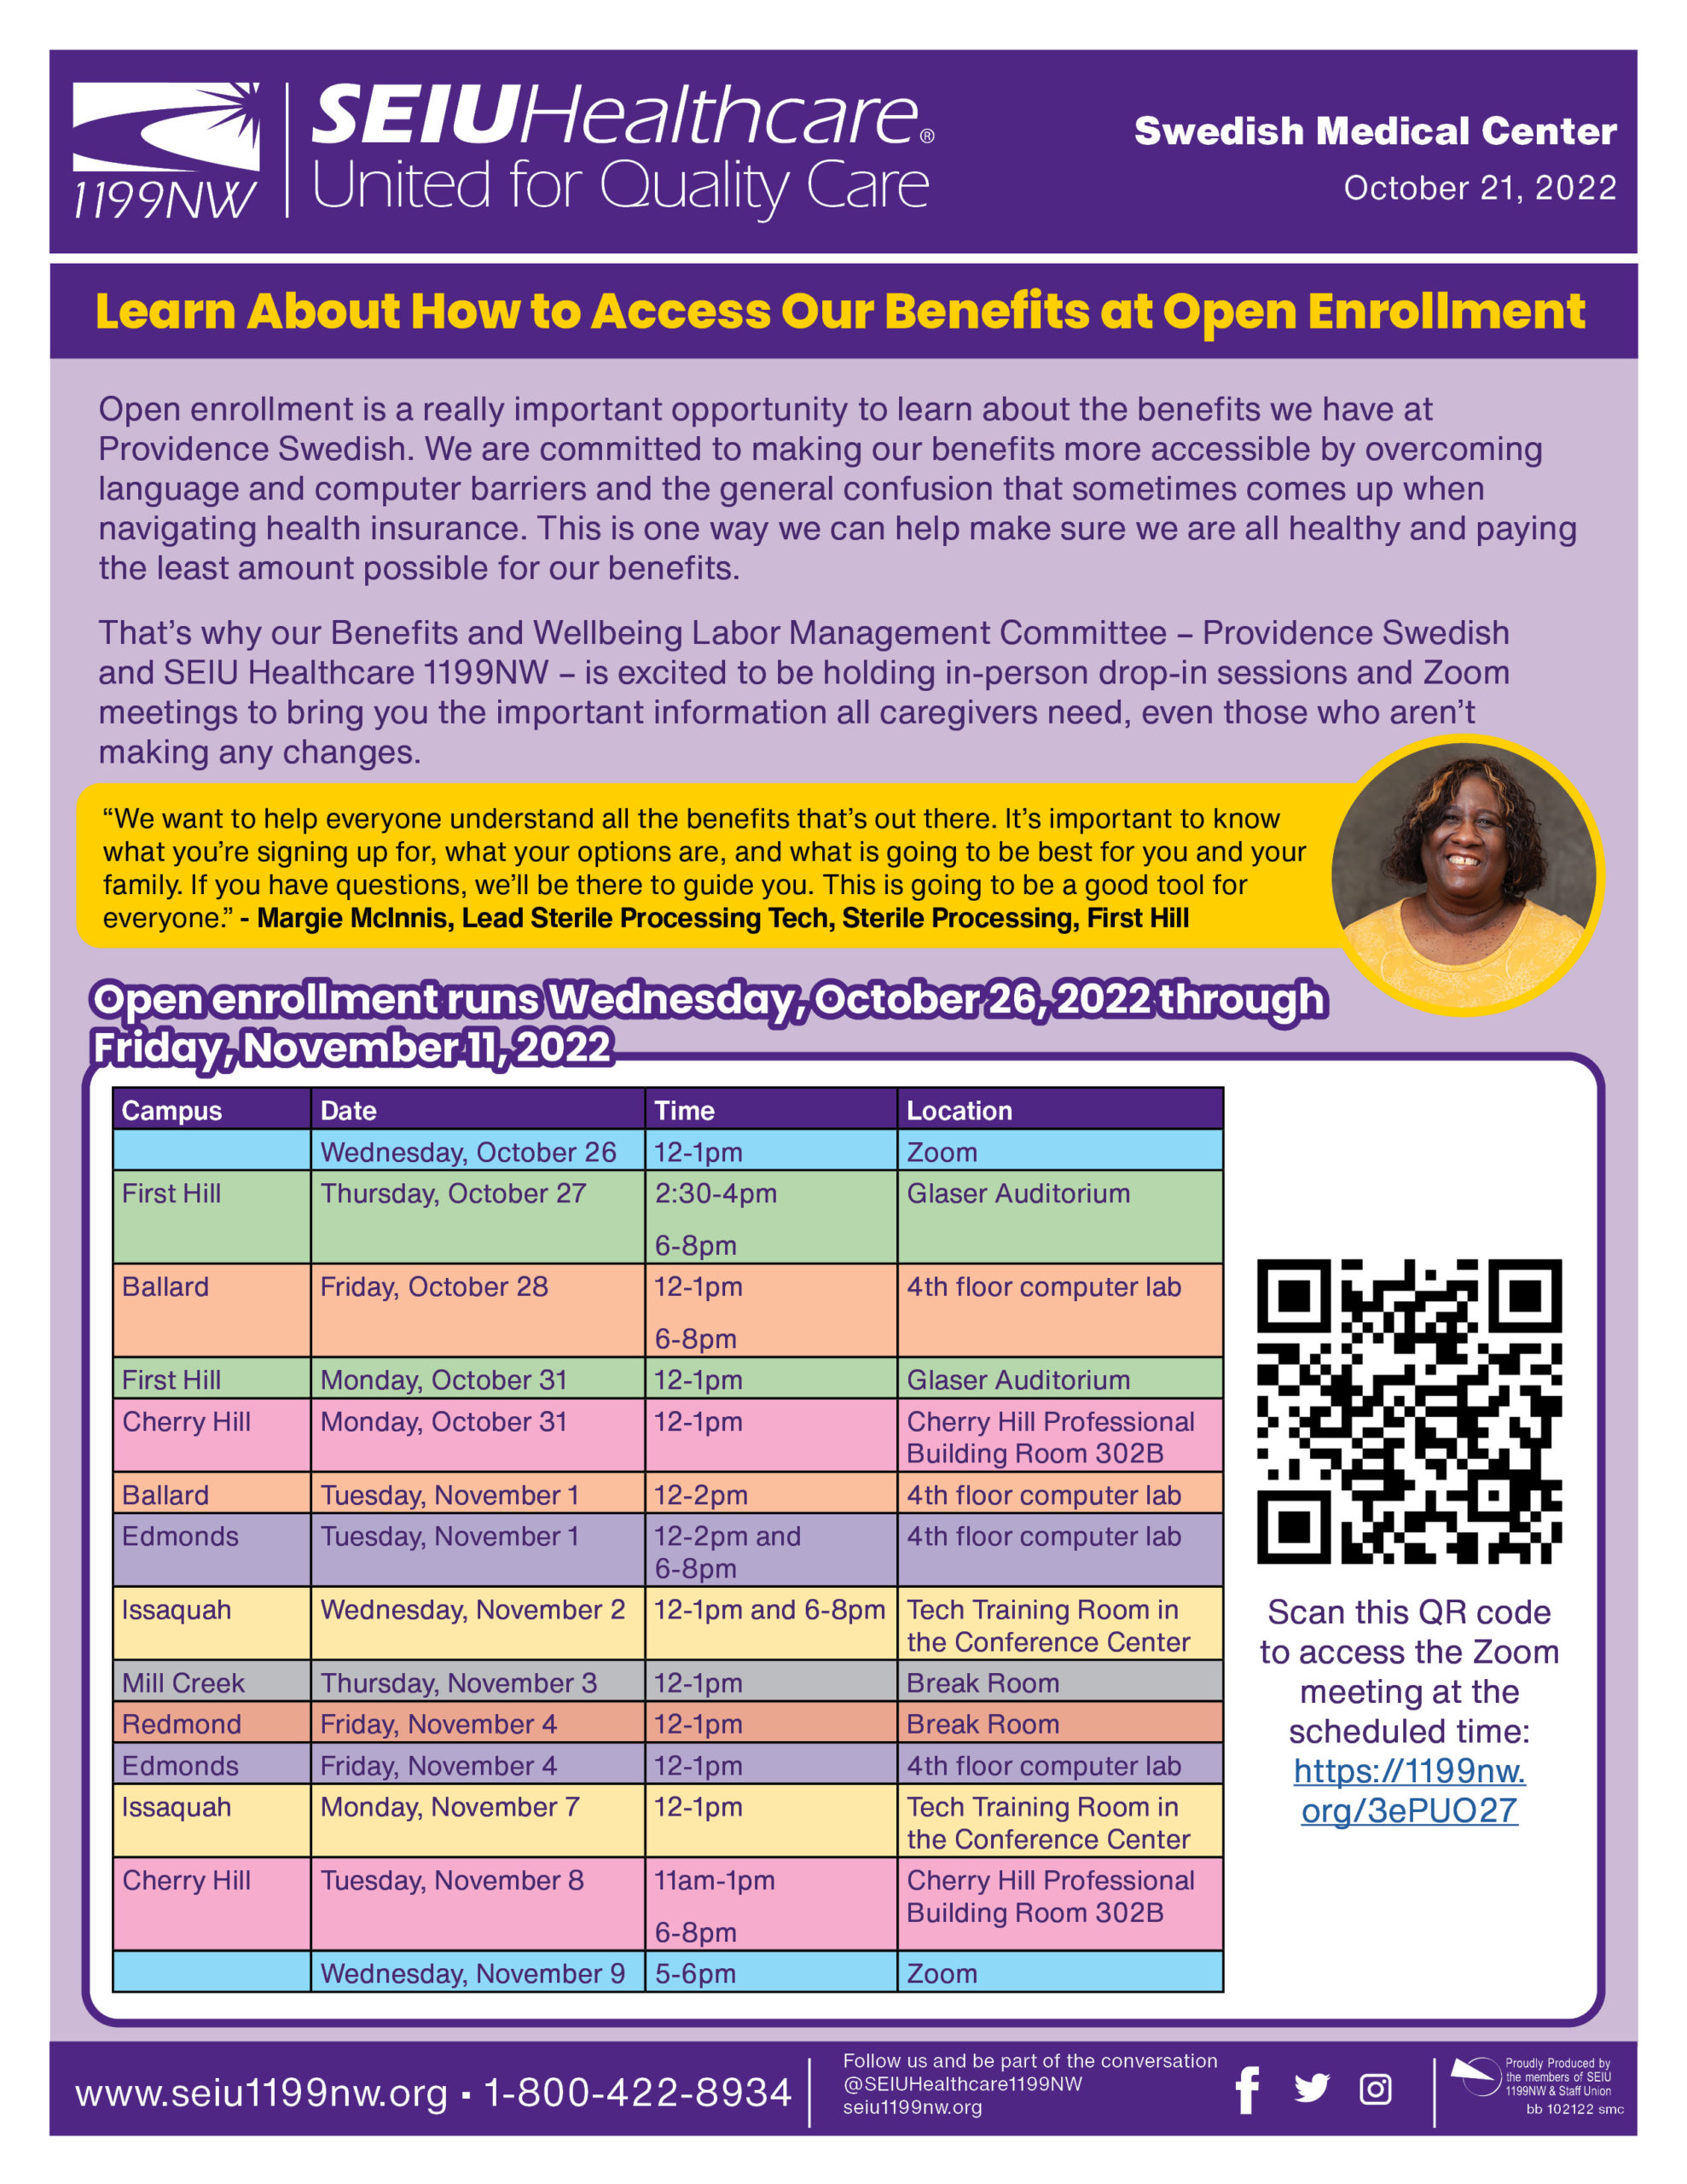 Learn About How to Access Our Benefits at Open Enrollment